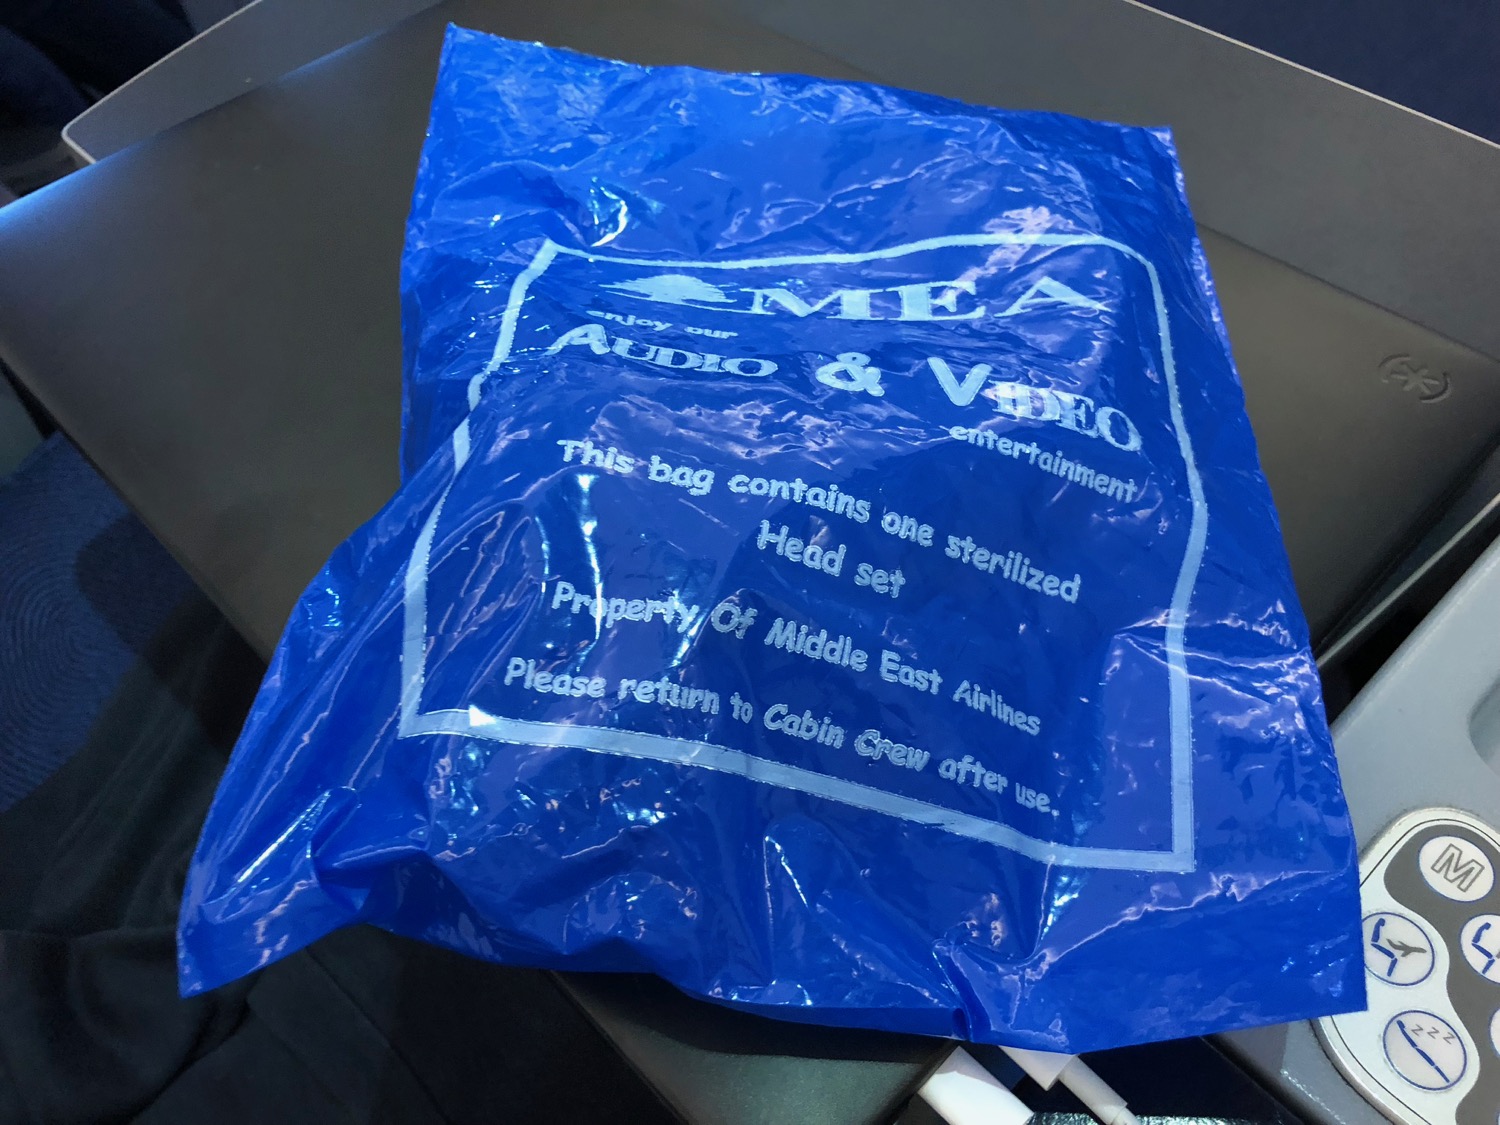 a blue plastic bag with white text on it